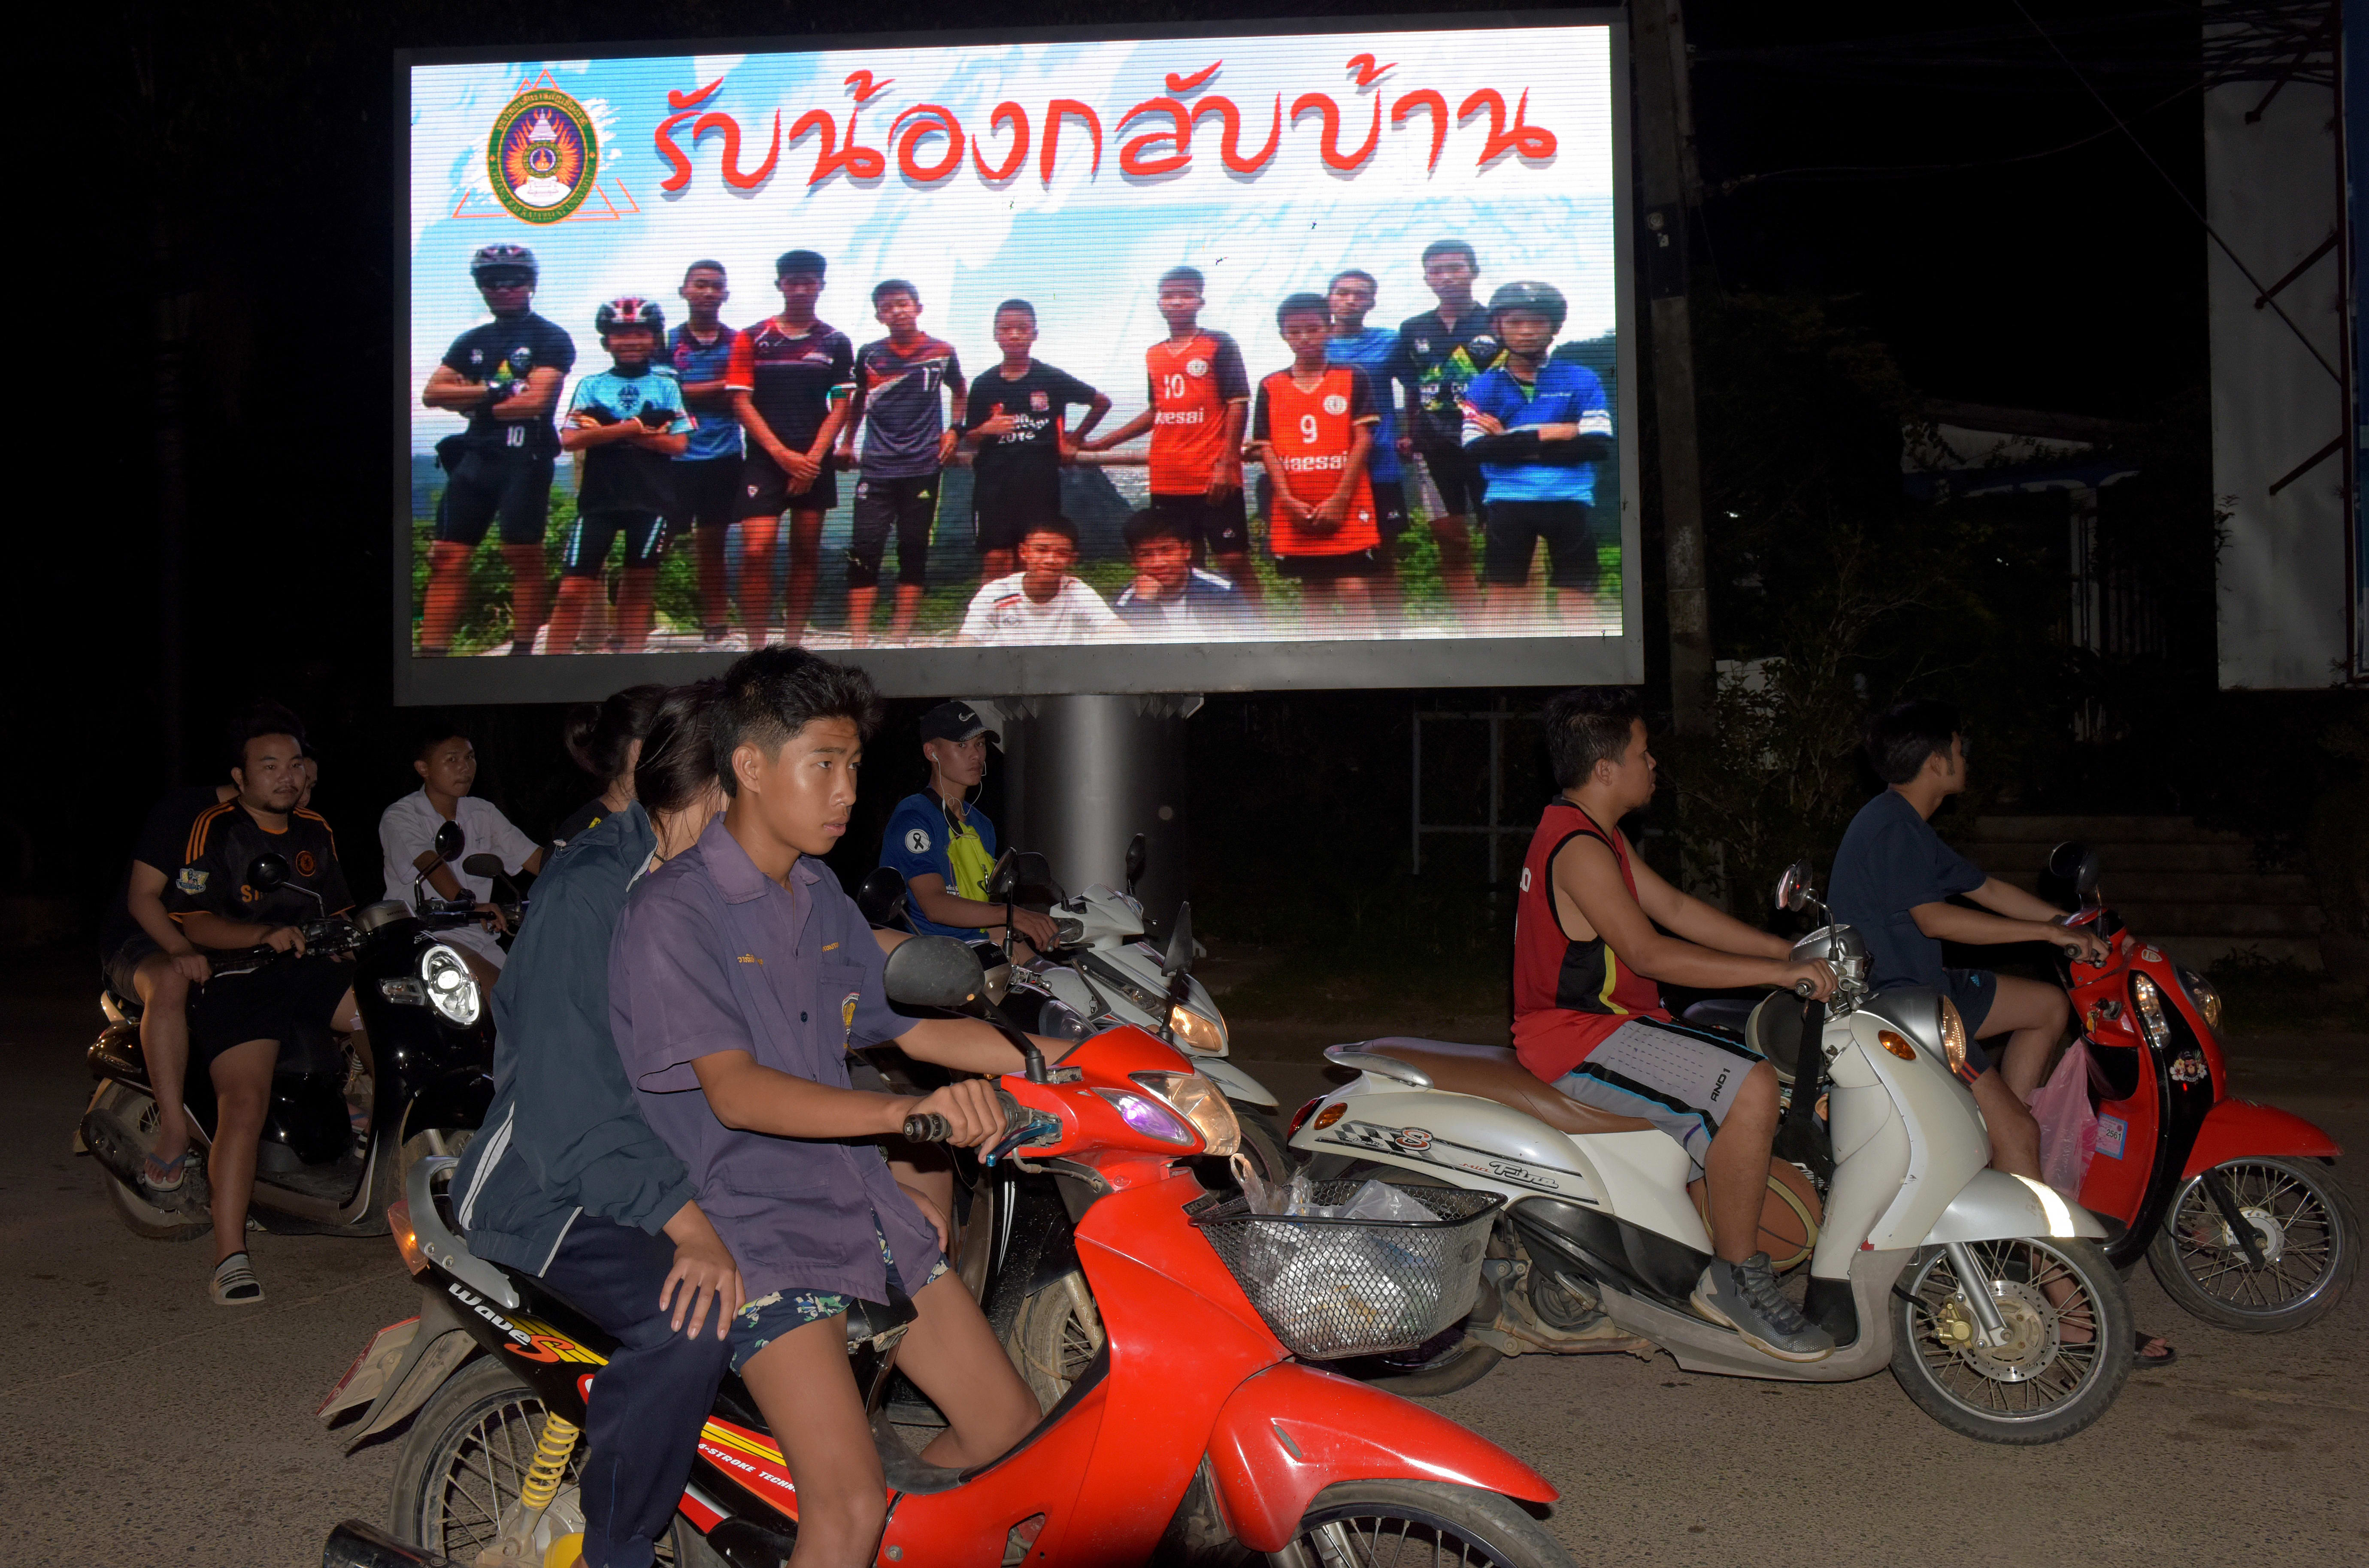 A billboard with a photograph of  members of the football team and their coach reads 'welcome home brothers'.